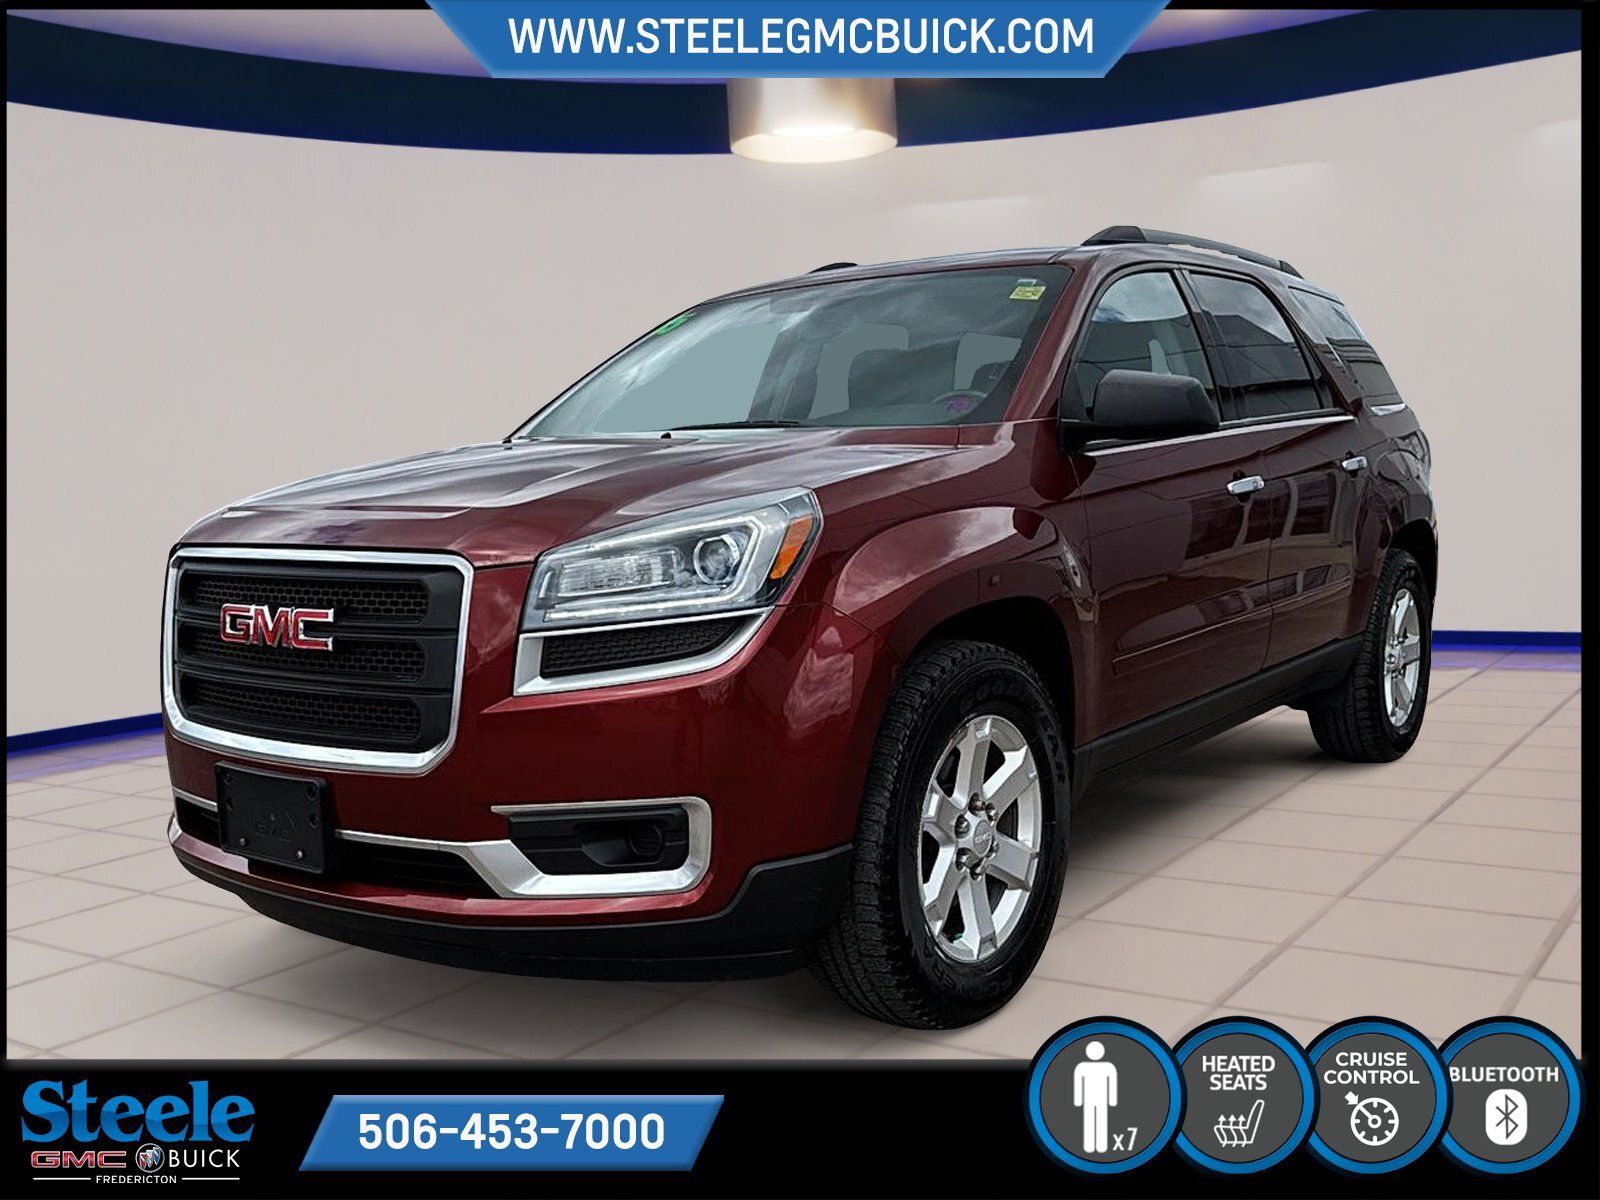 2015 GMC Acadia | FOR SALE SIN STEELE FREDERCITON |